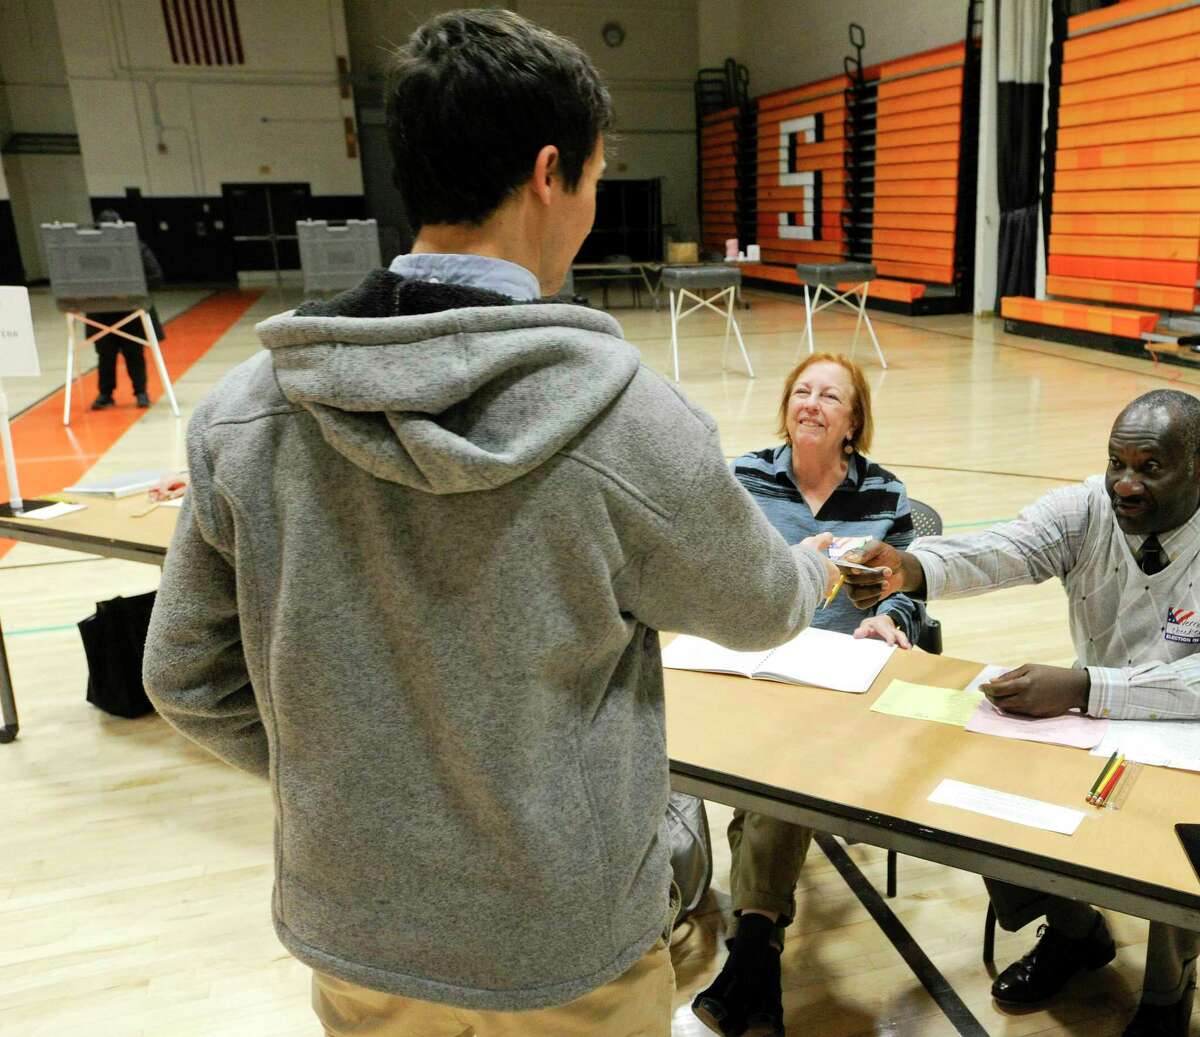 Election workers Christie Irvin and Vernond Souffrant check in a resident at District 12 polling site at Stamford High School on Nov. 5, 2019 in Stamford, Connecticut.